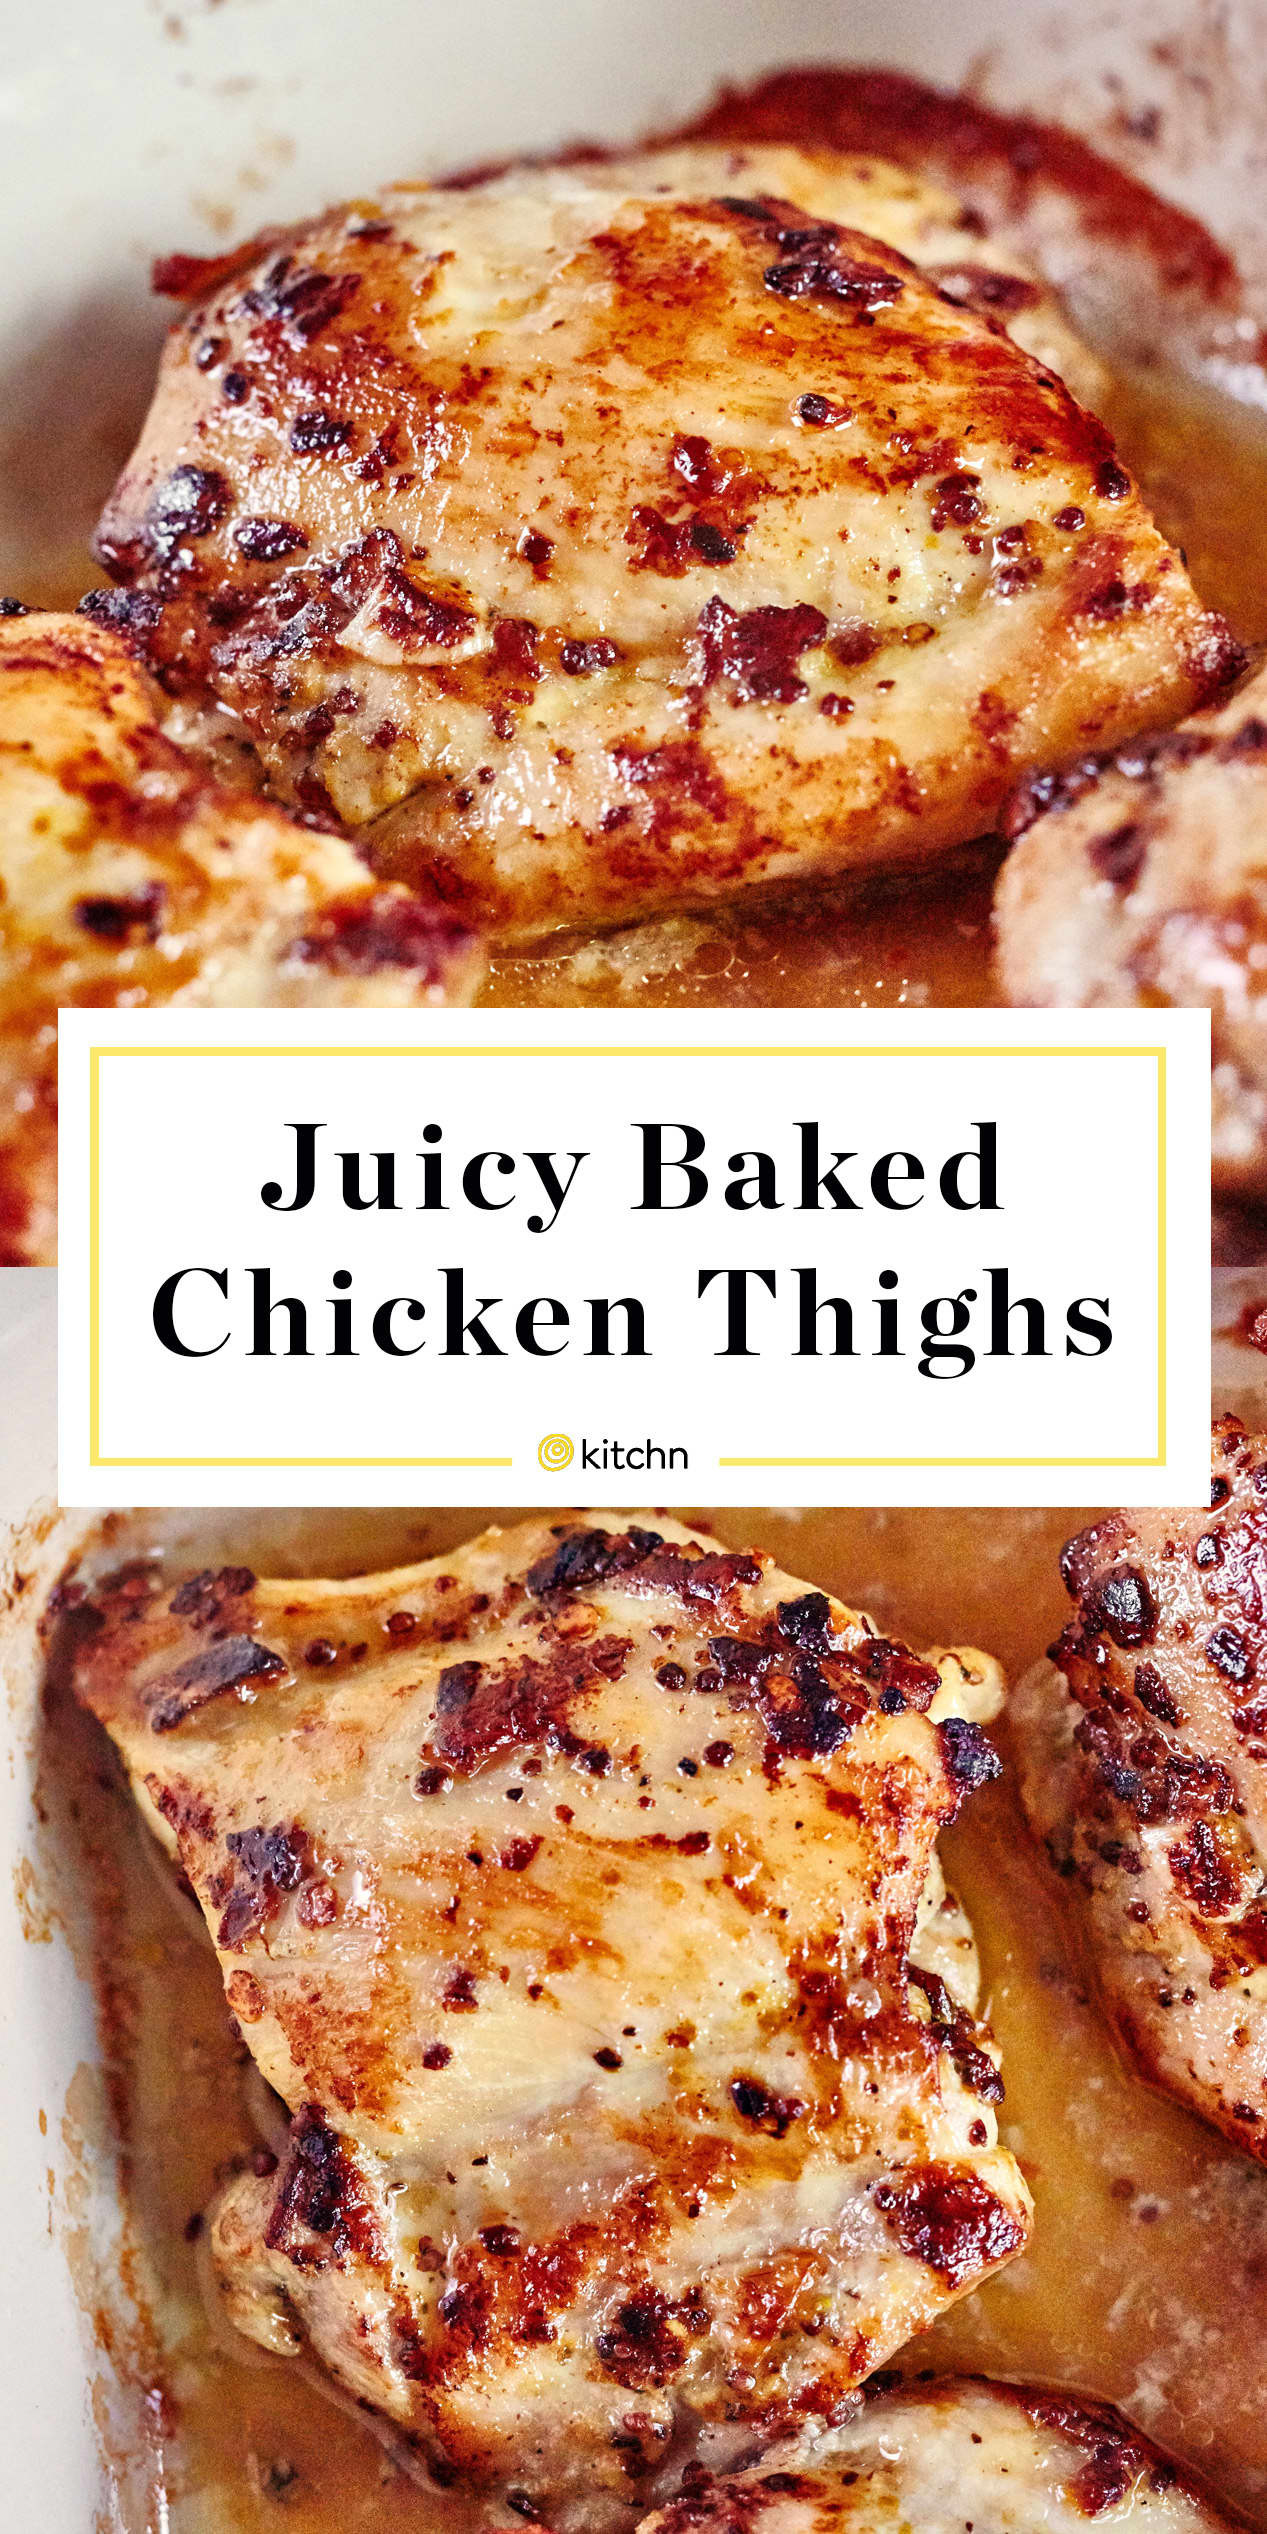 Baking Boneless Chicken Thighs
 How To Cook Boneless Skinless Chicken Thighs in the Oven